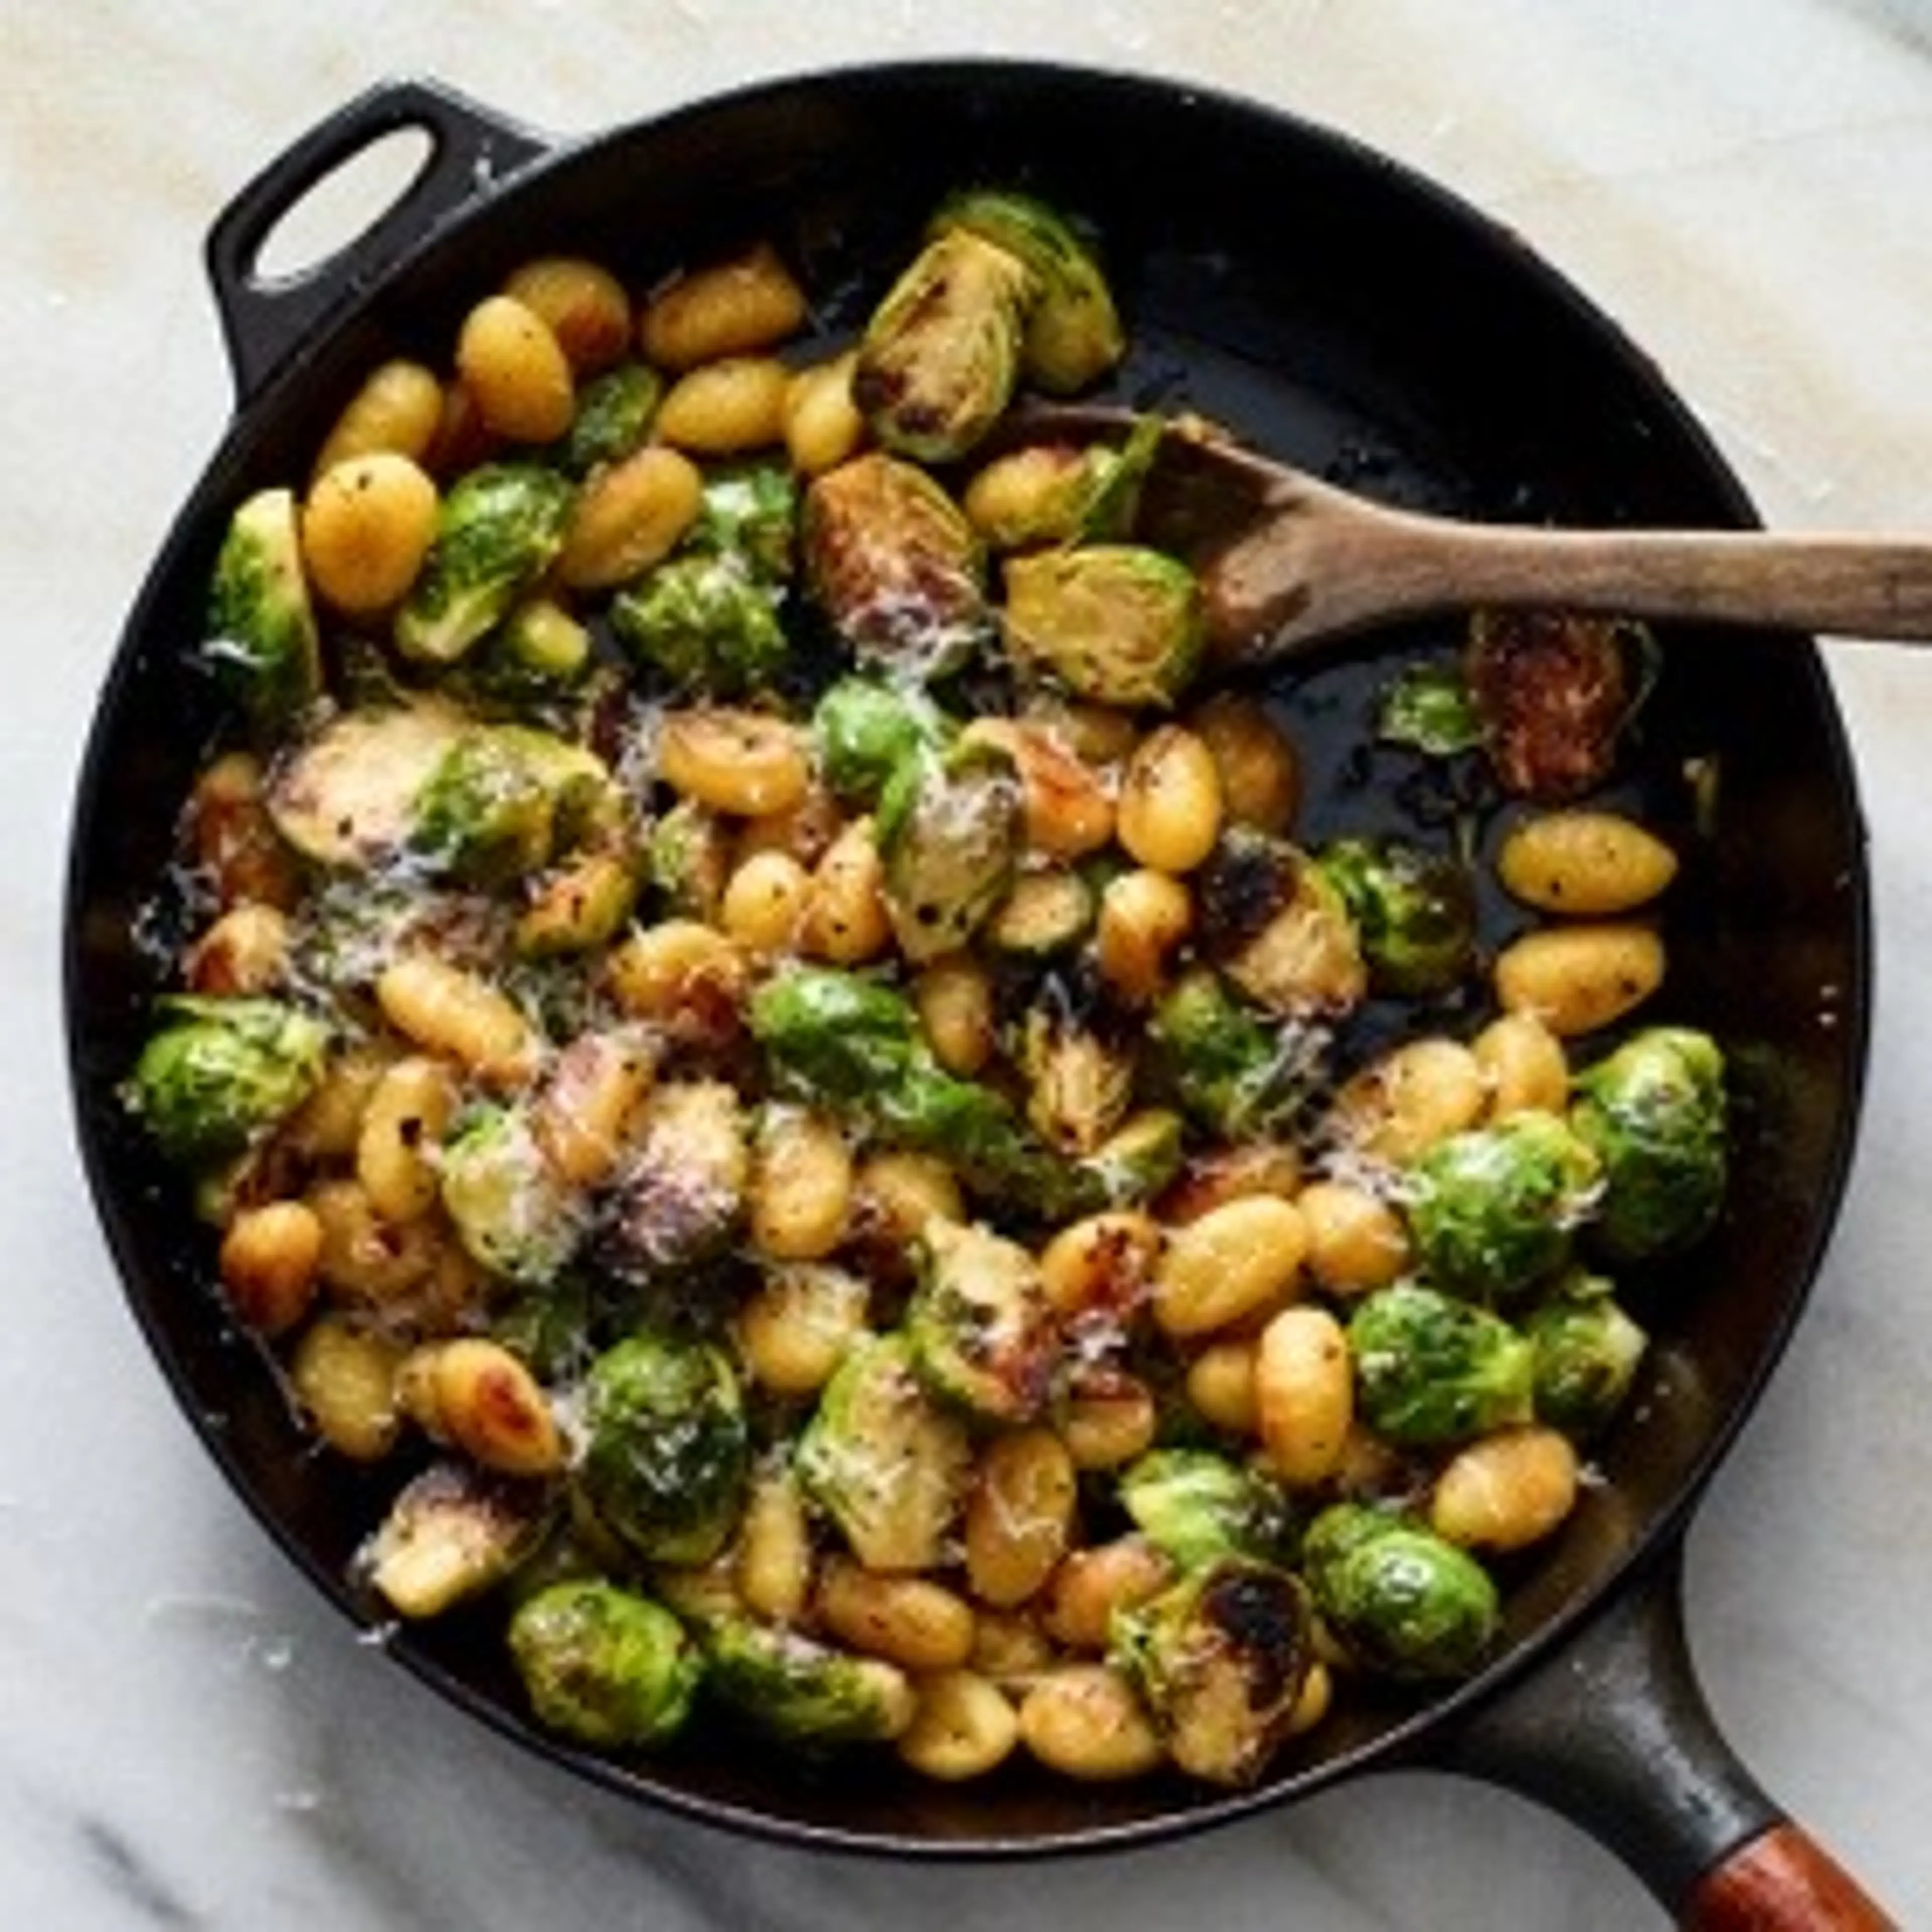 Crisp Gnocchi with Brussels Sprouts and Brown Butter